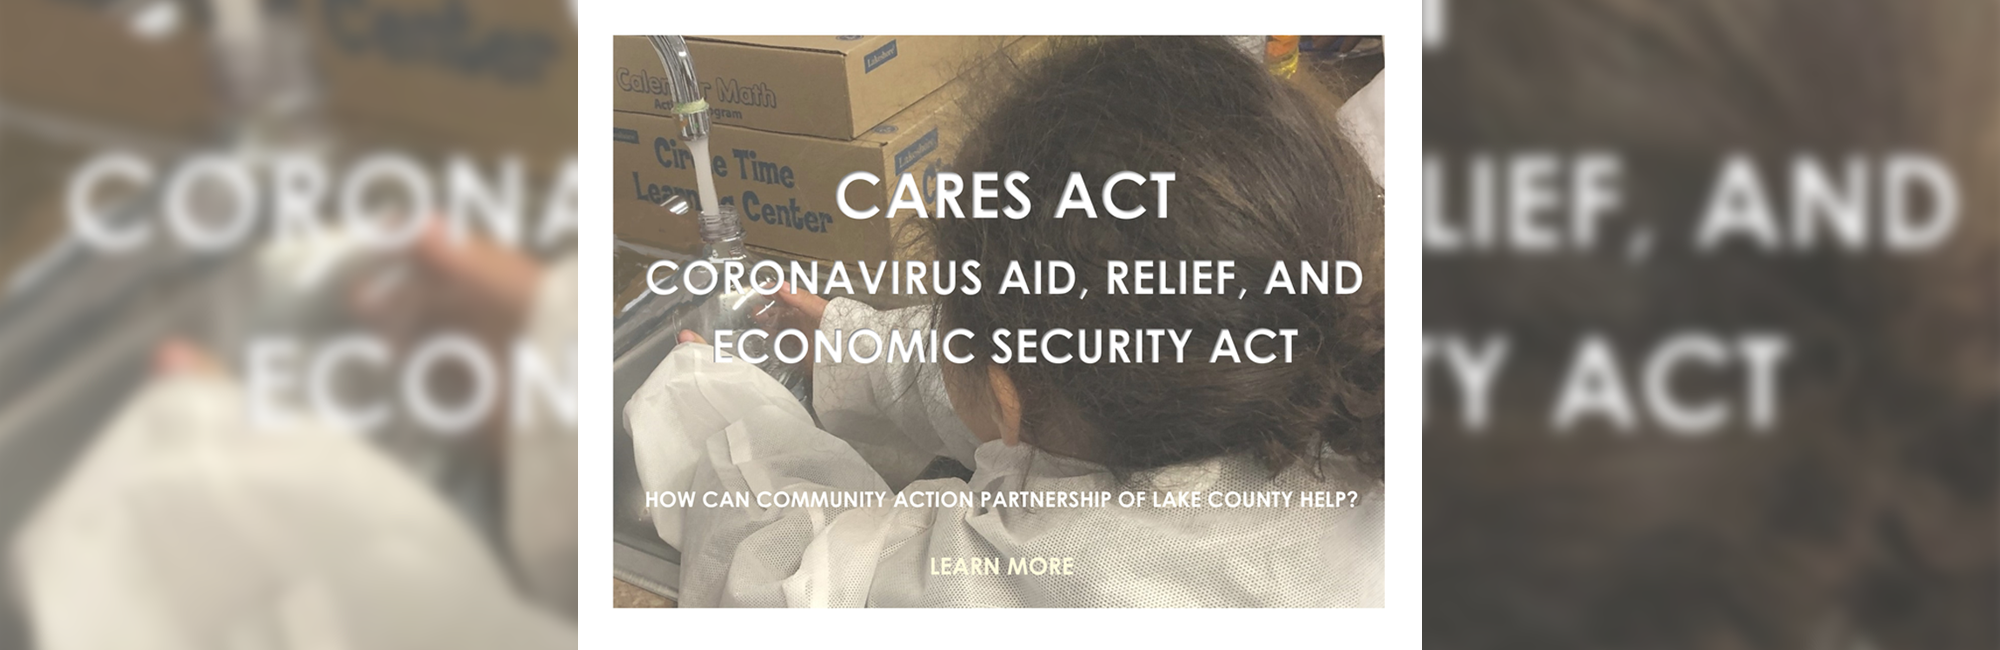 Cares Act - Coronavirus Aid Relief and Economic Security Act